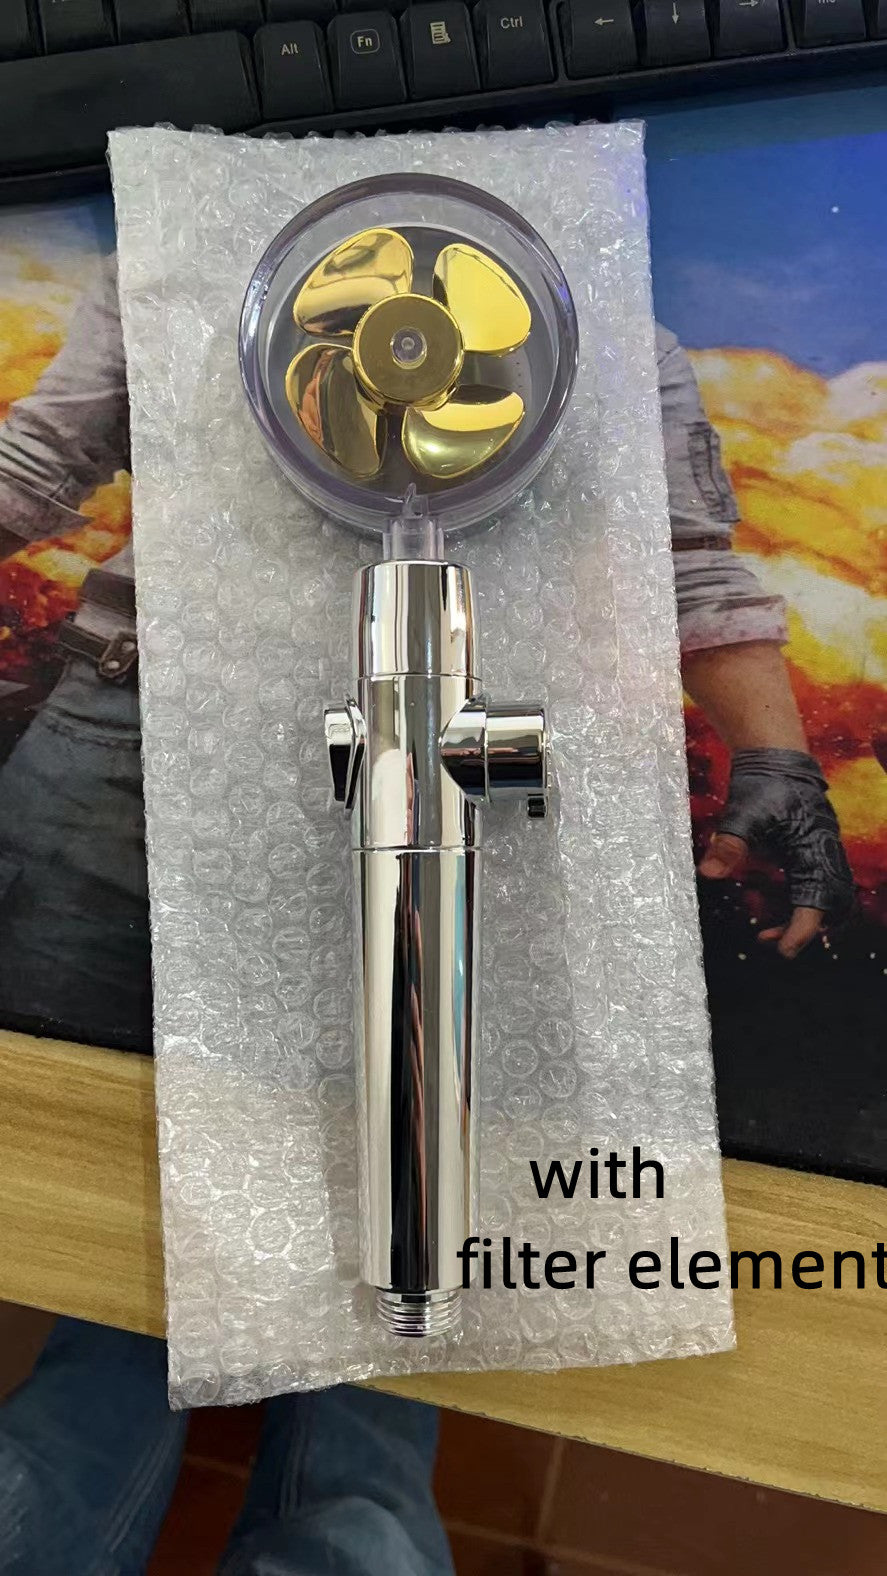 New Turbo Propeller Shower Head Water Saving High Preassure Flow 360 Degrees With Fan Extension Showerhead Rainfall With Holder